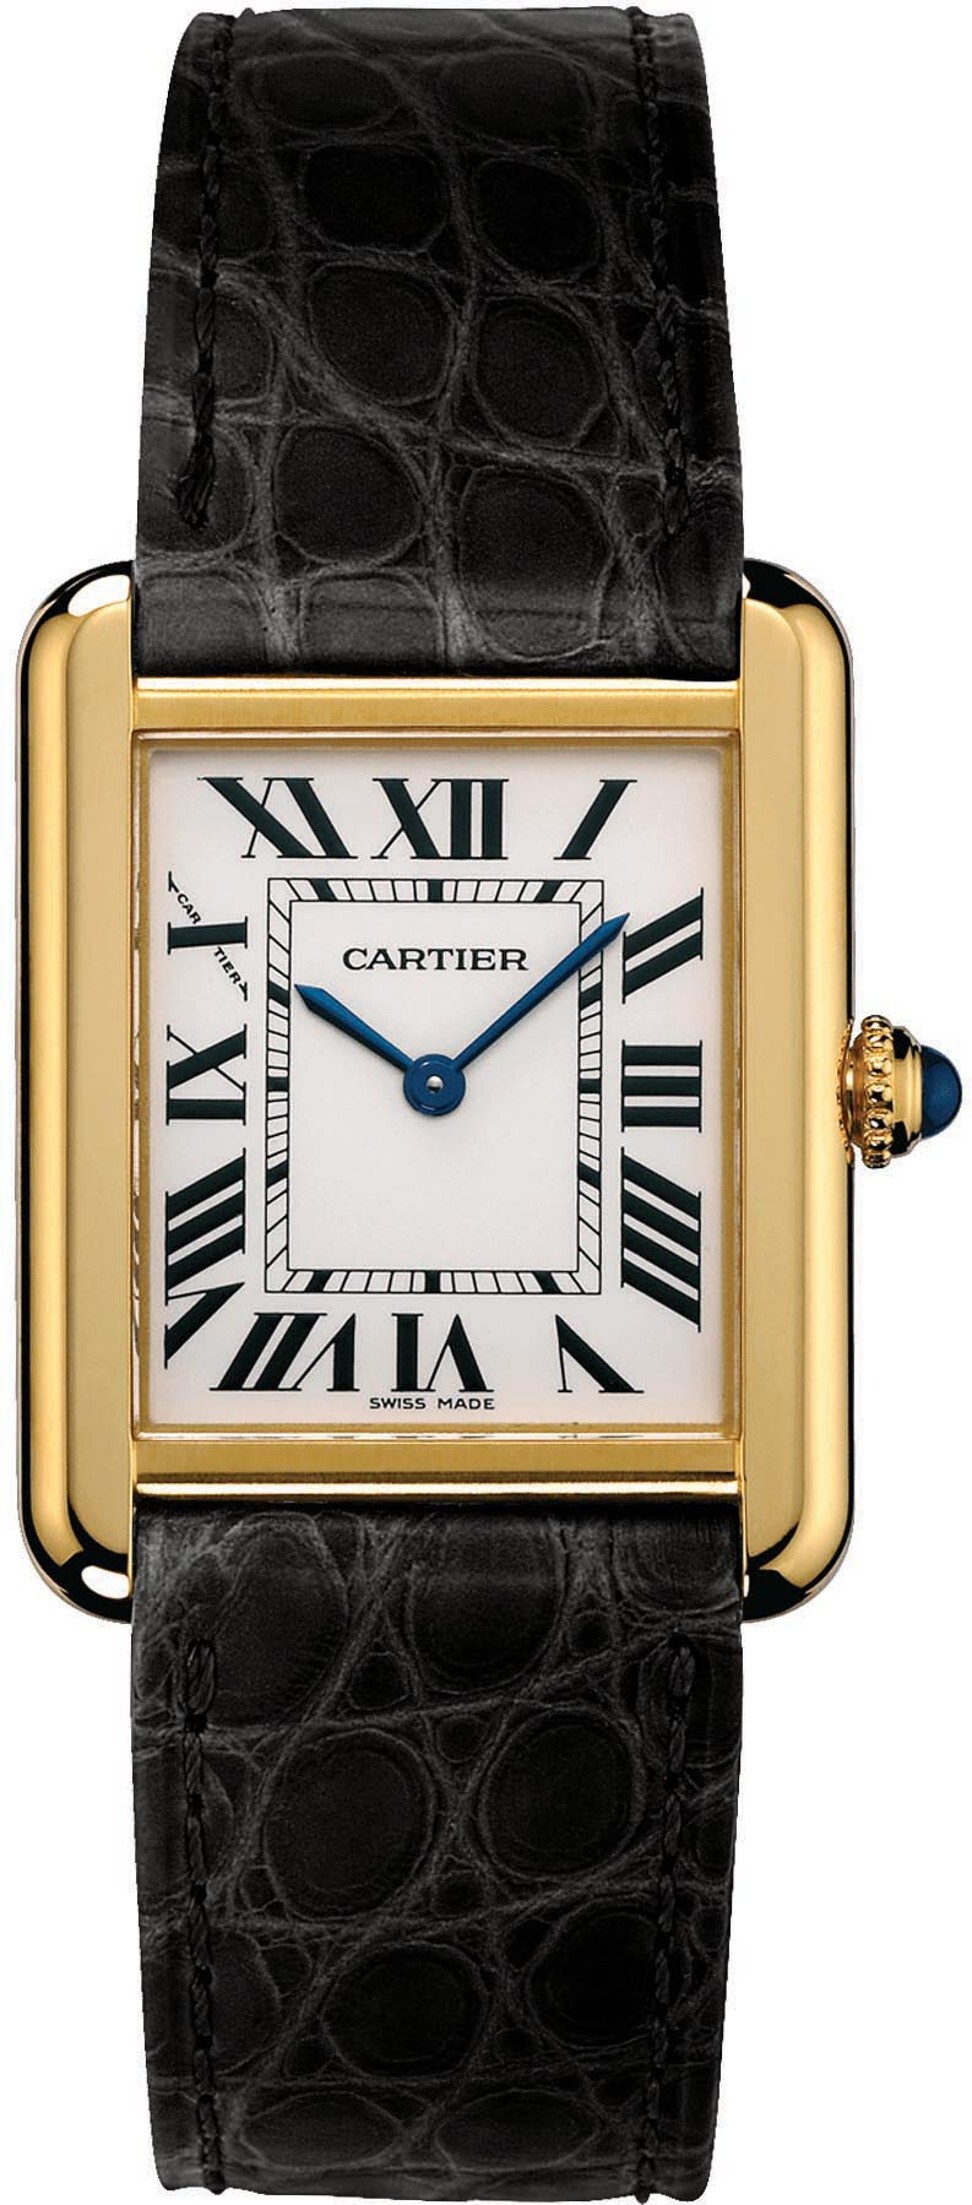 A version of the Cartier Tank watch in yellow Diana was often seen wearing. Photo: Cartier